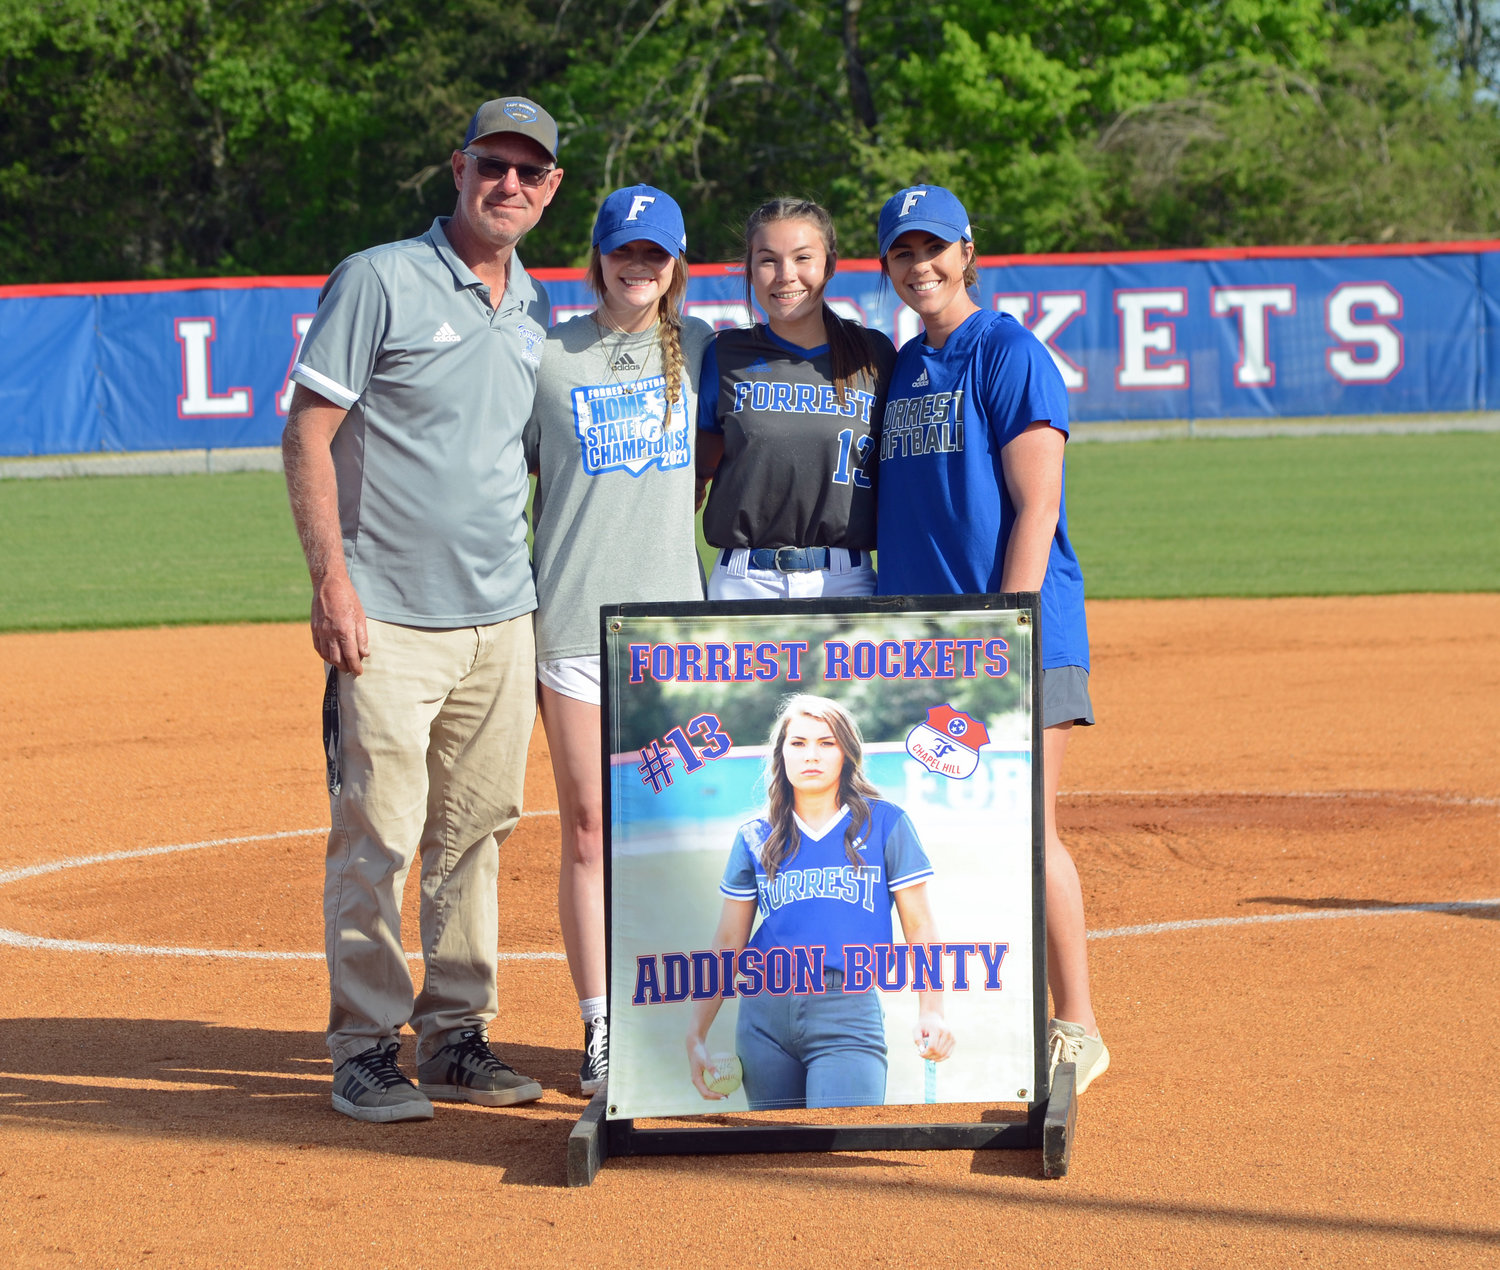 From left are Forrest coaches Ricky Stinnett and Ally Blanton, senior Addison Bunty, and Forrest head coach Shelby Lightfoot.